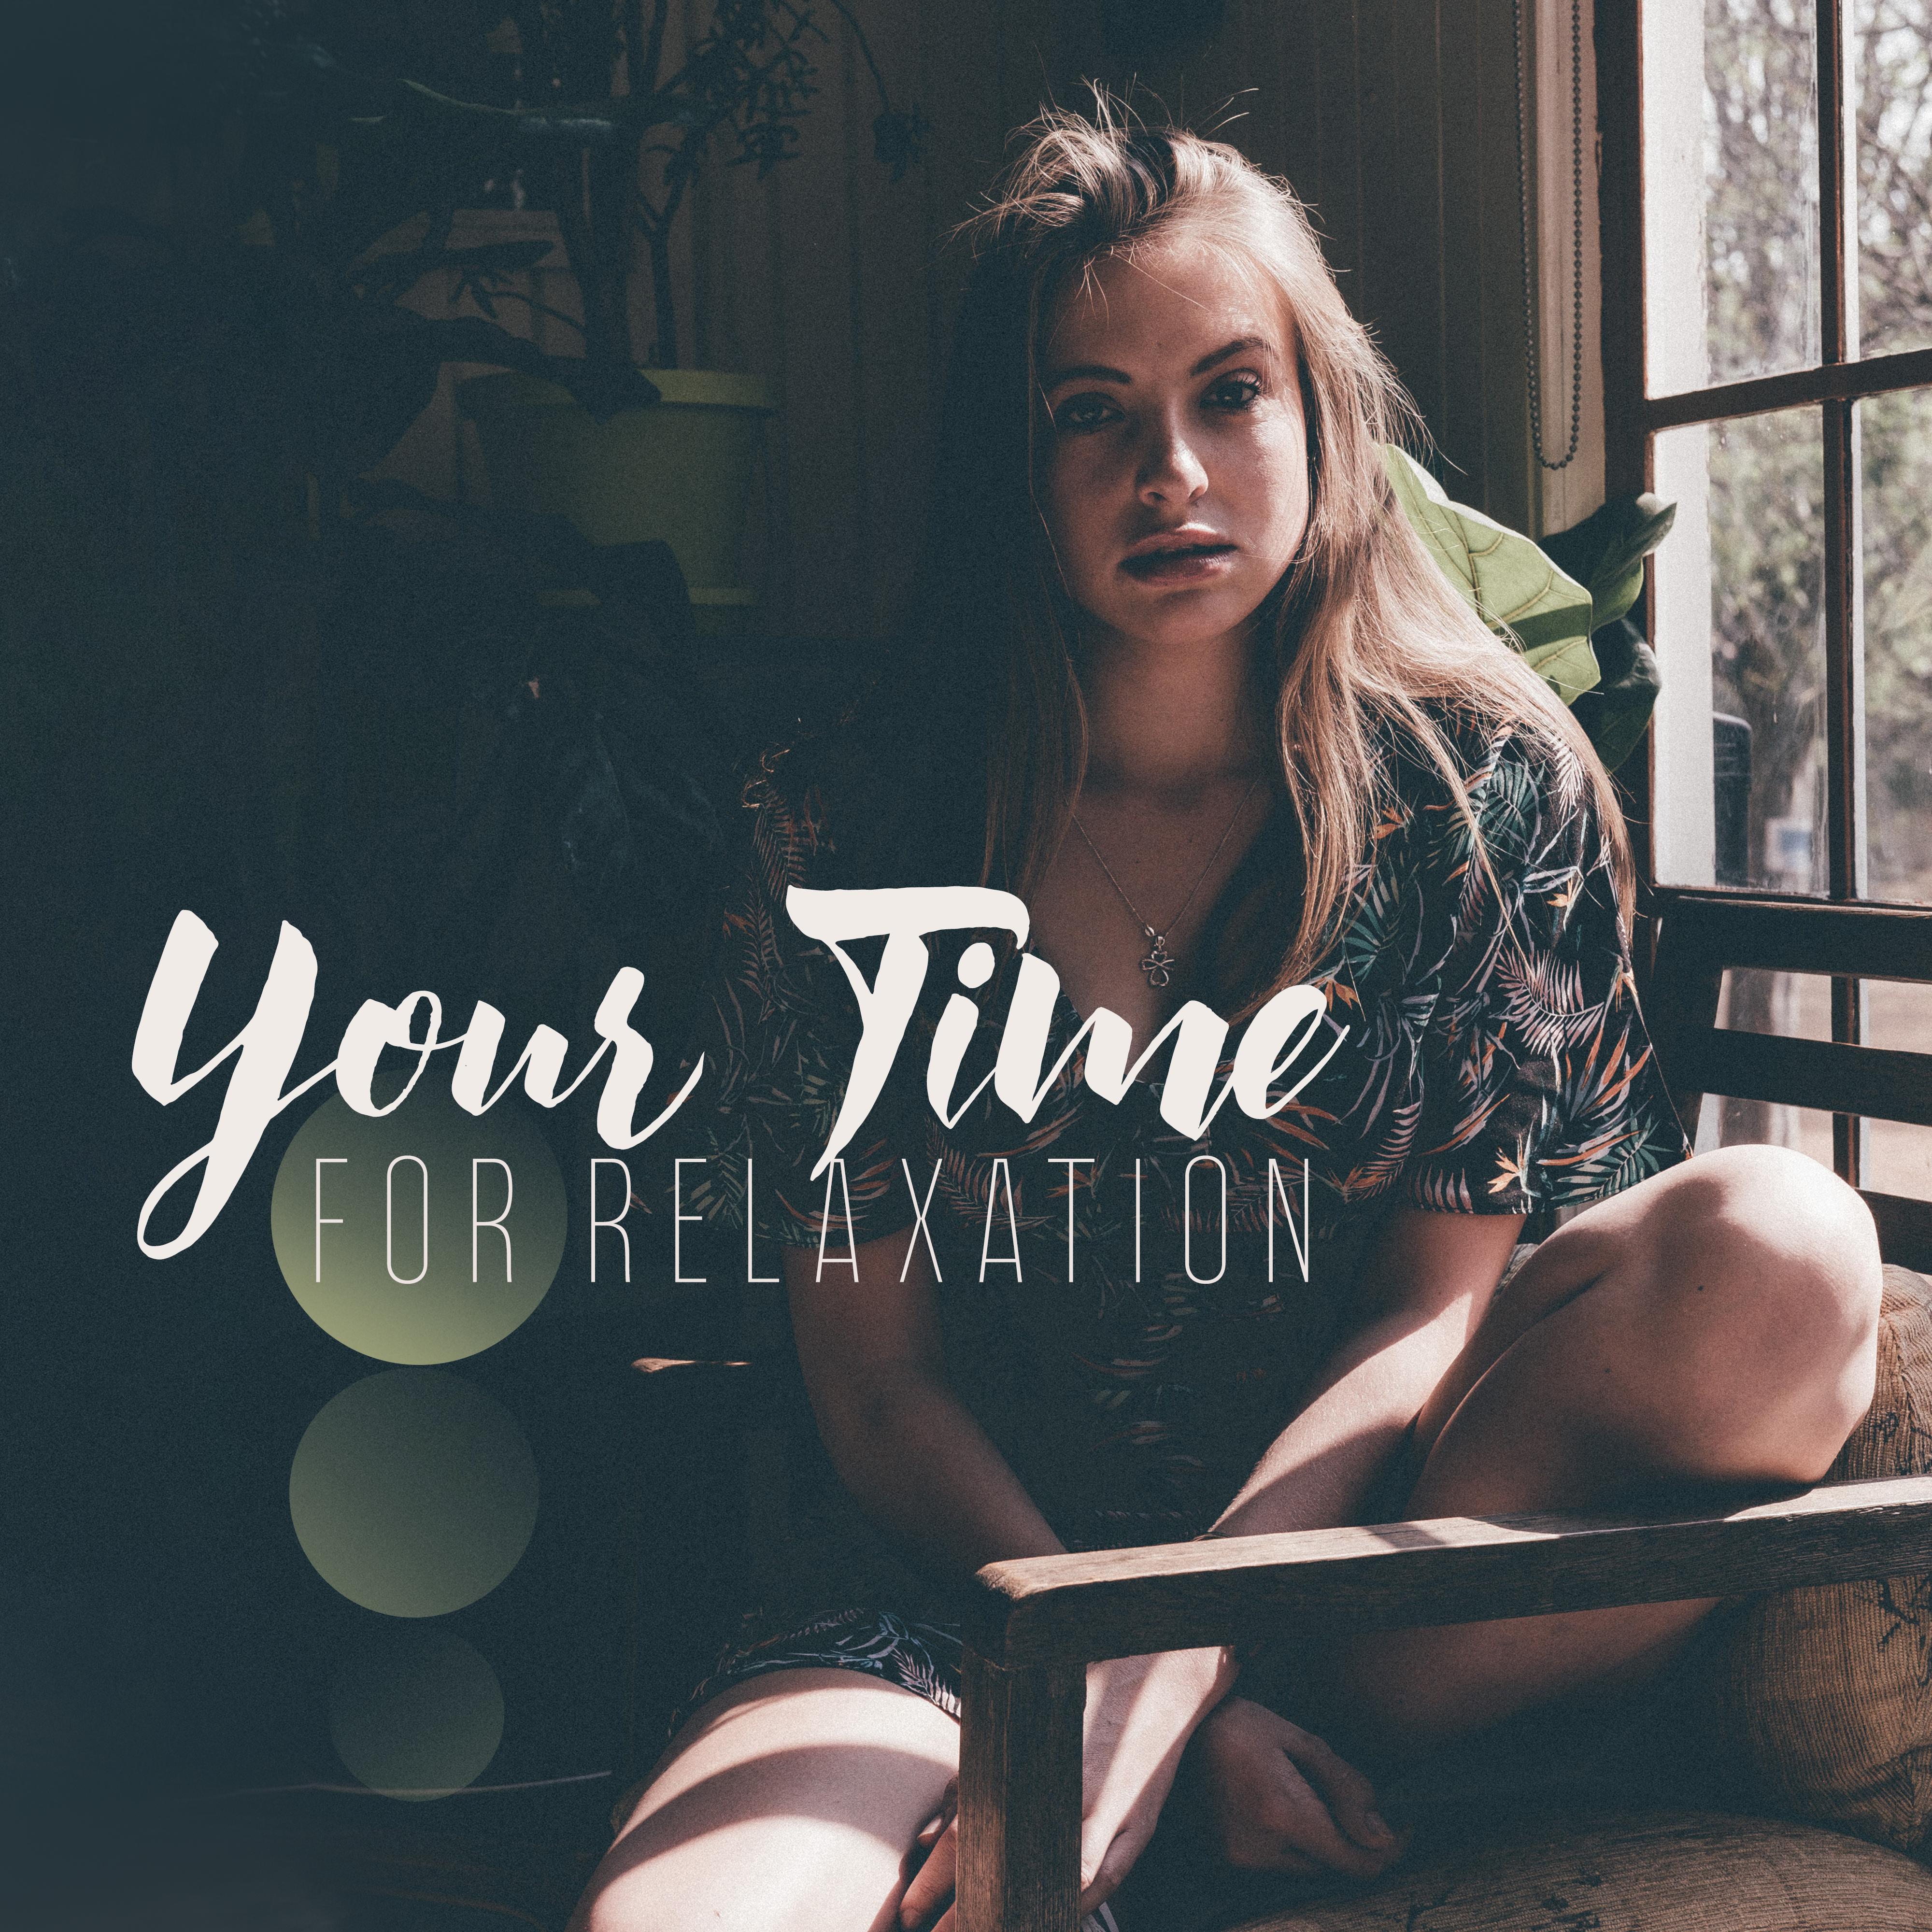 Your Time for Relaxation: After Tough Day New Age 2019 Relaxing Music, Sounds to Calm Down, Rest, Stress Relief, Inner Regeneration